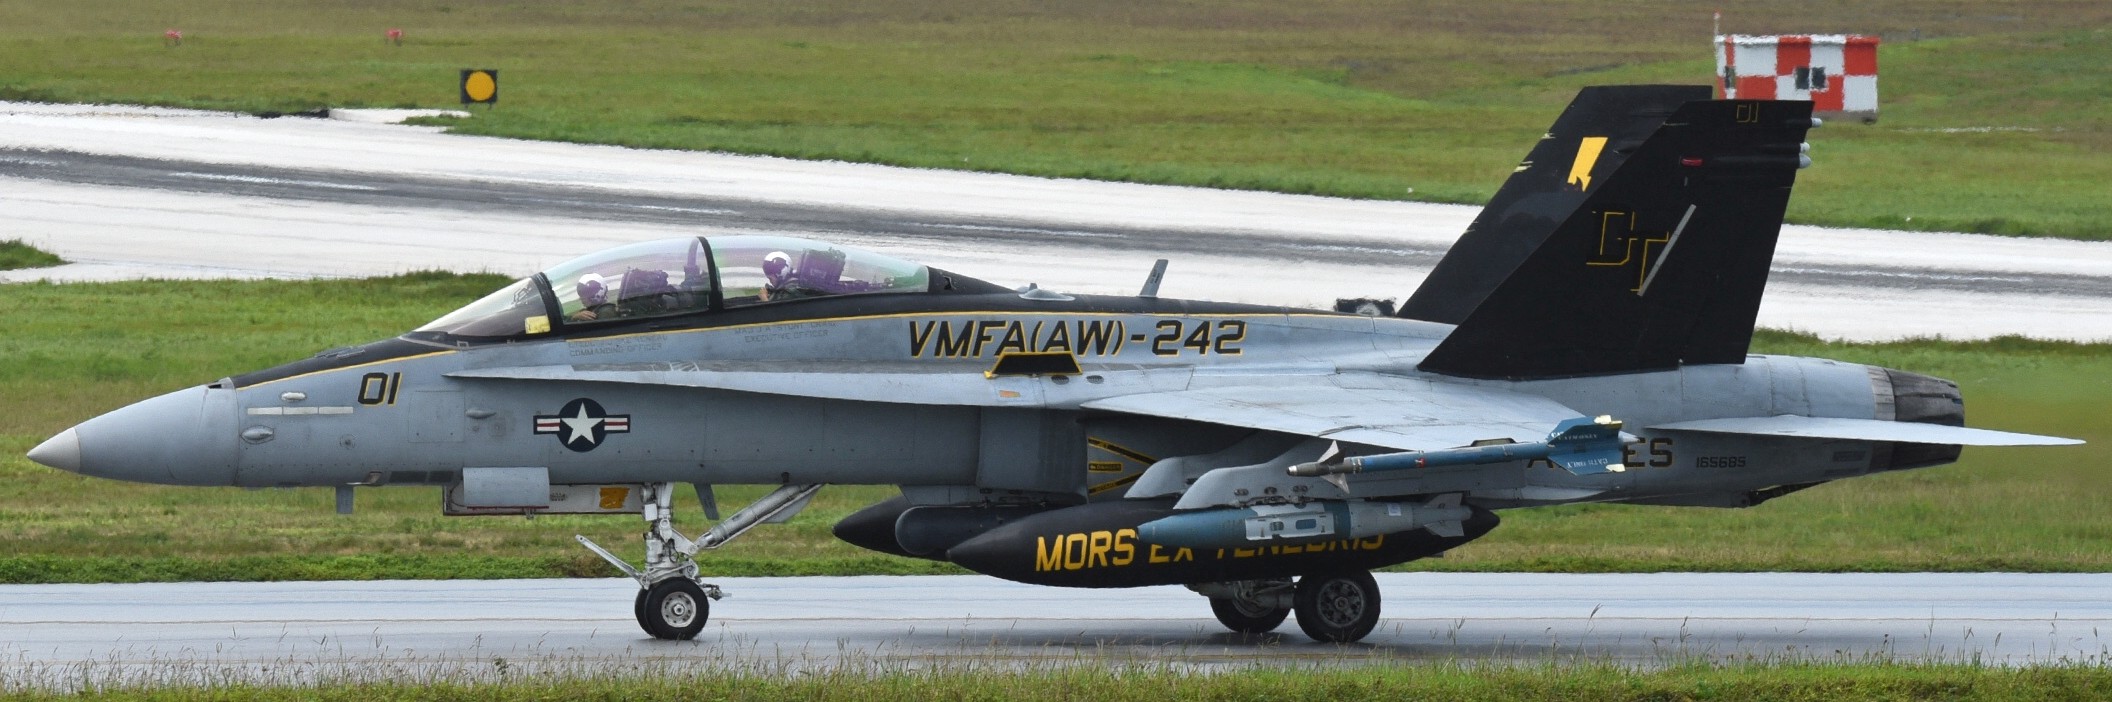 vmfa(aw)-242 bats marine all-weather fighter attack squadron usmc f/a-18d hornet 70 exercise valiant shield 2016